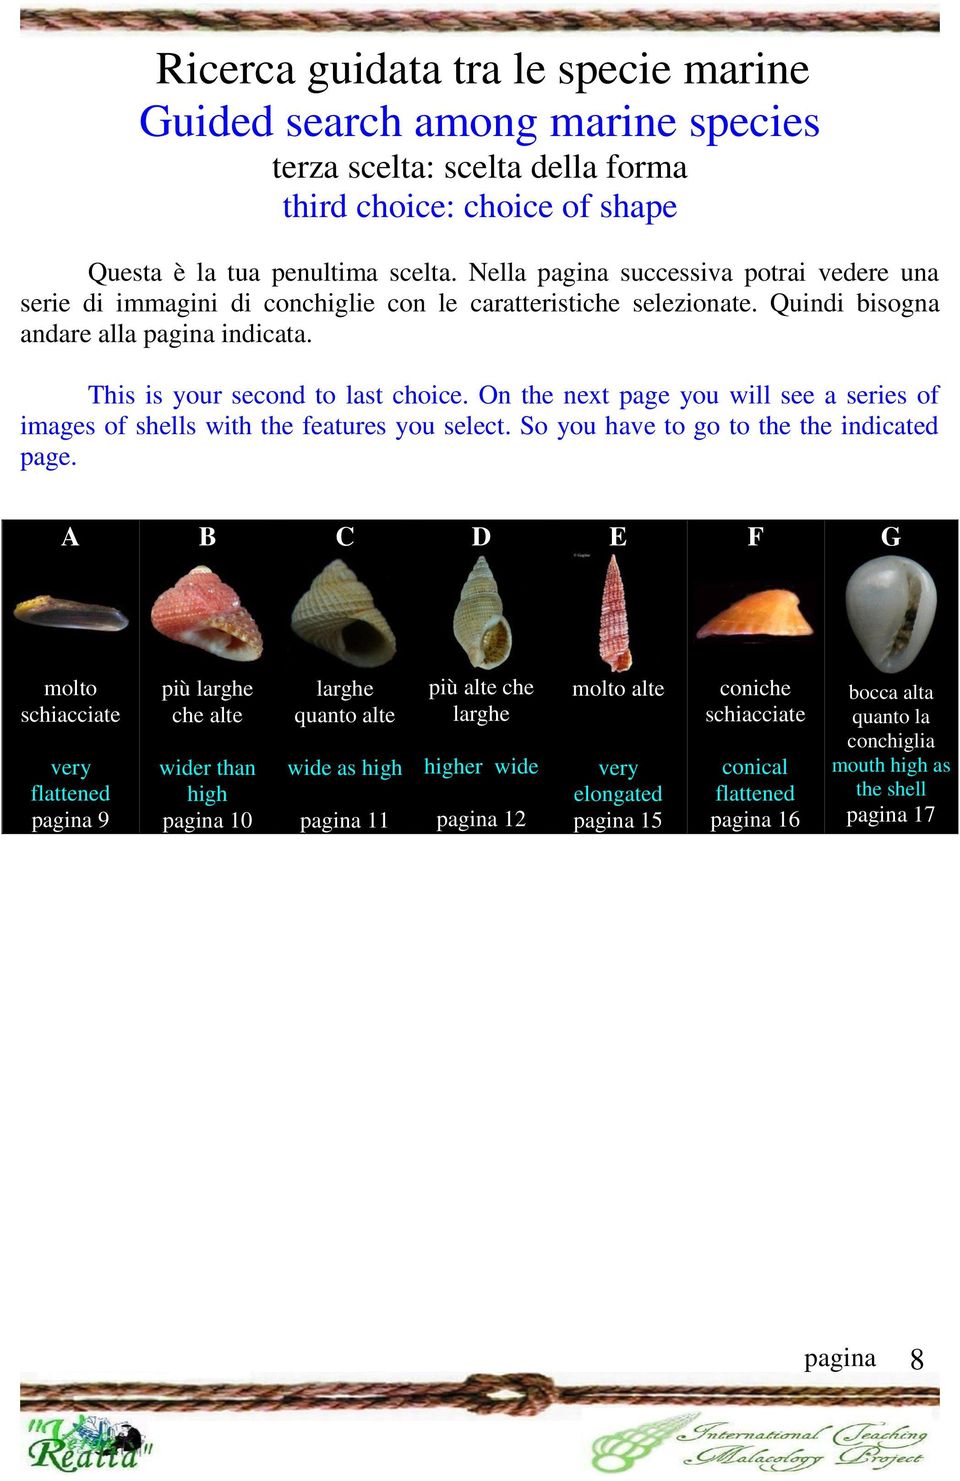 On the next page you will see a series of images of shells with the features you select. So you have to go to the the indicated page.